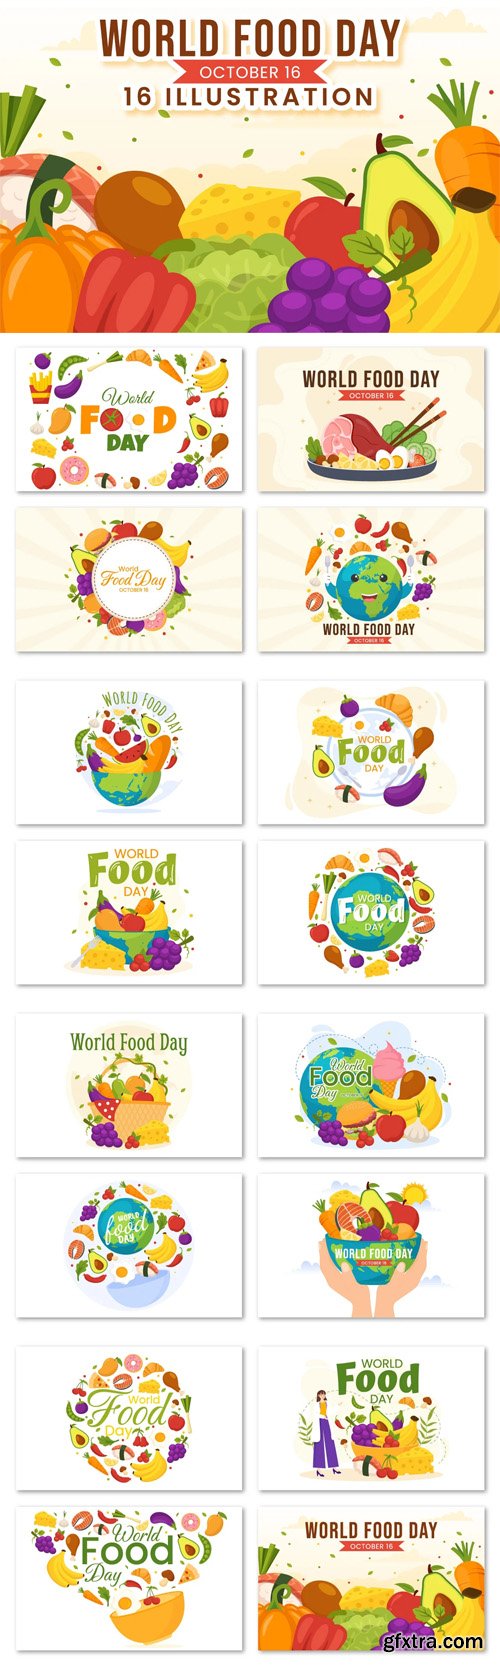 World Food Day Illustrations Pack